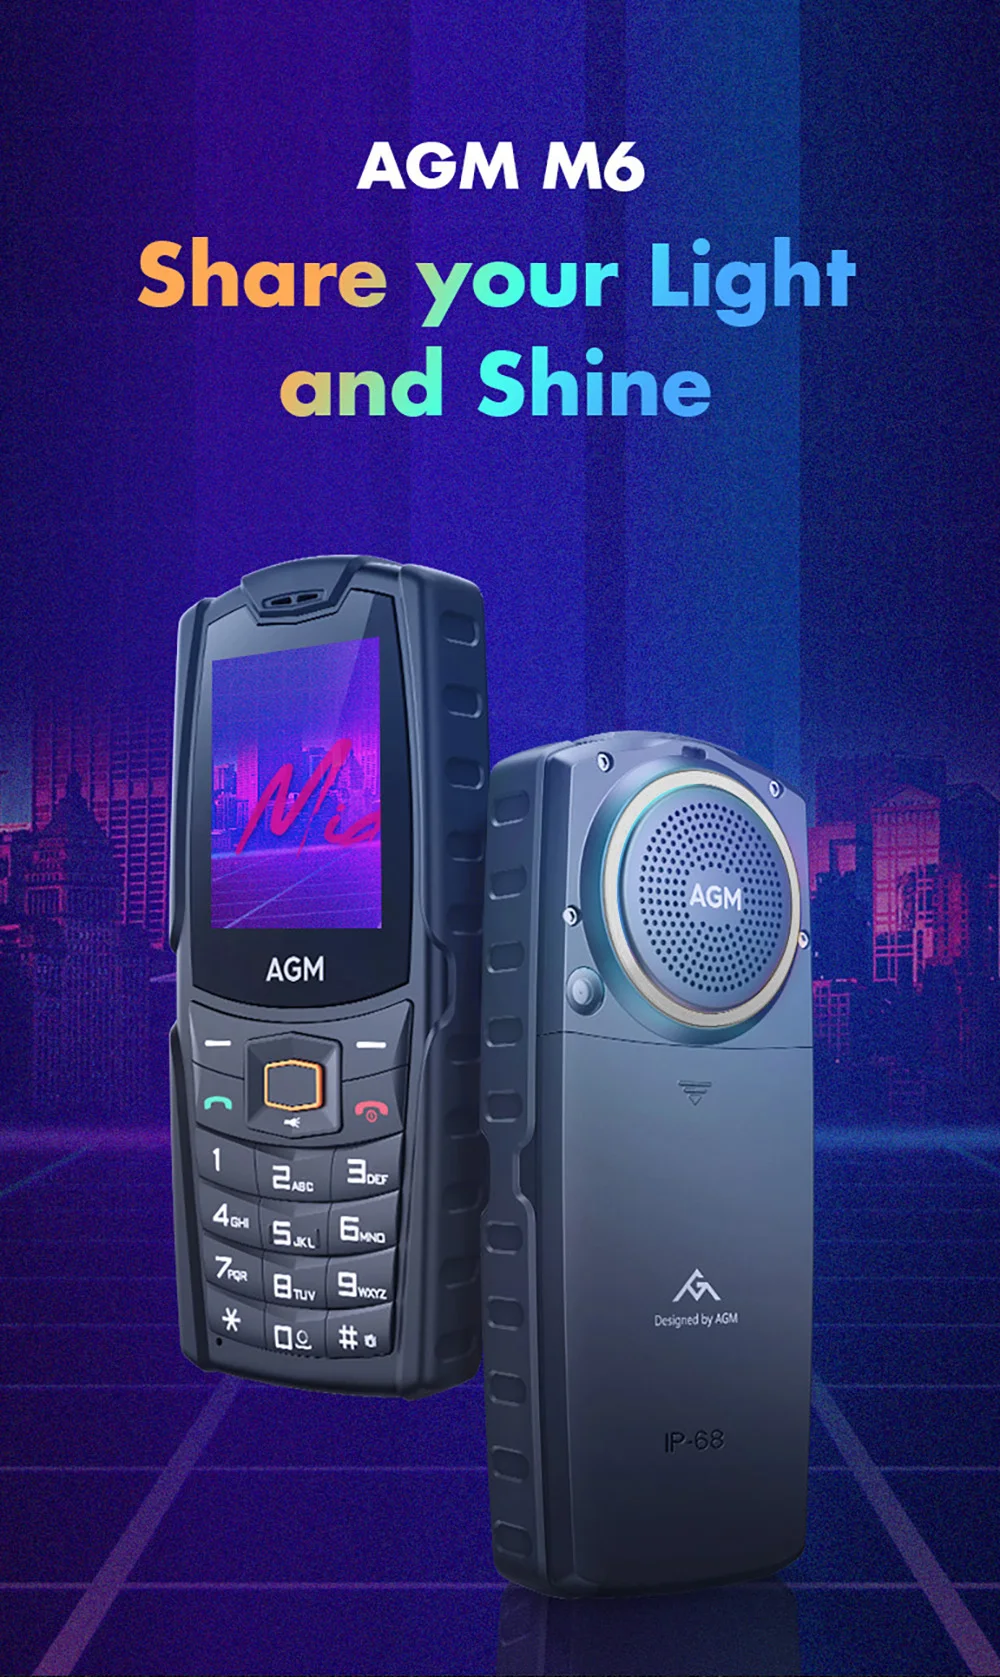 AGM M6 4G IP68 Push-Button Keypad 2500mAh Rugged Feature Cellphone Dual SIM  Celular For Senior with fast shipping on AliExpress